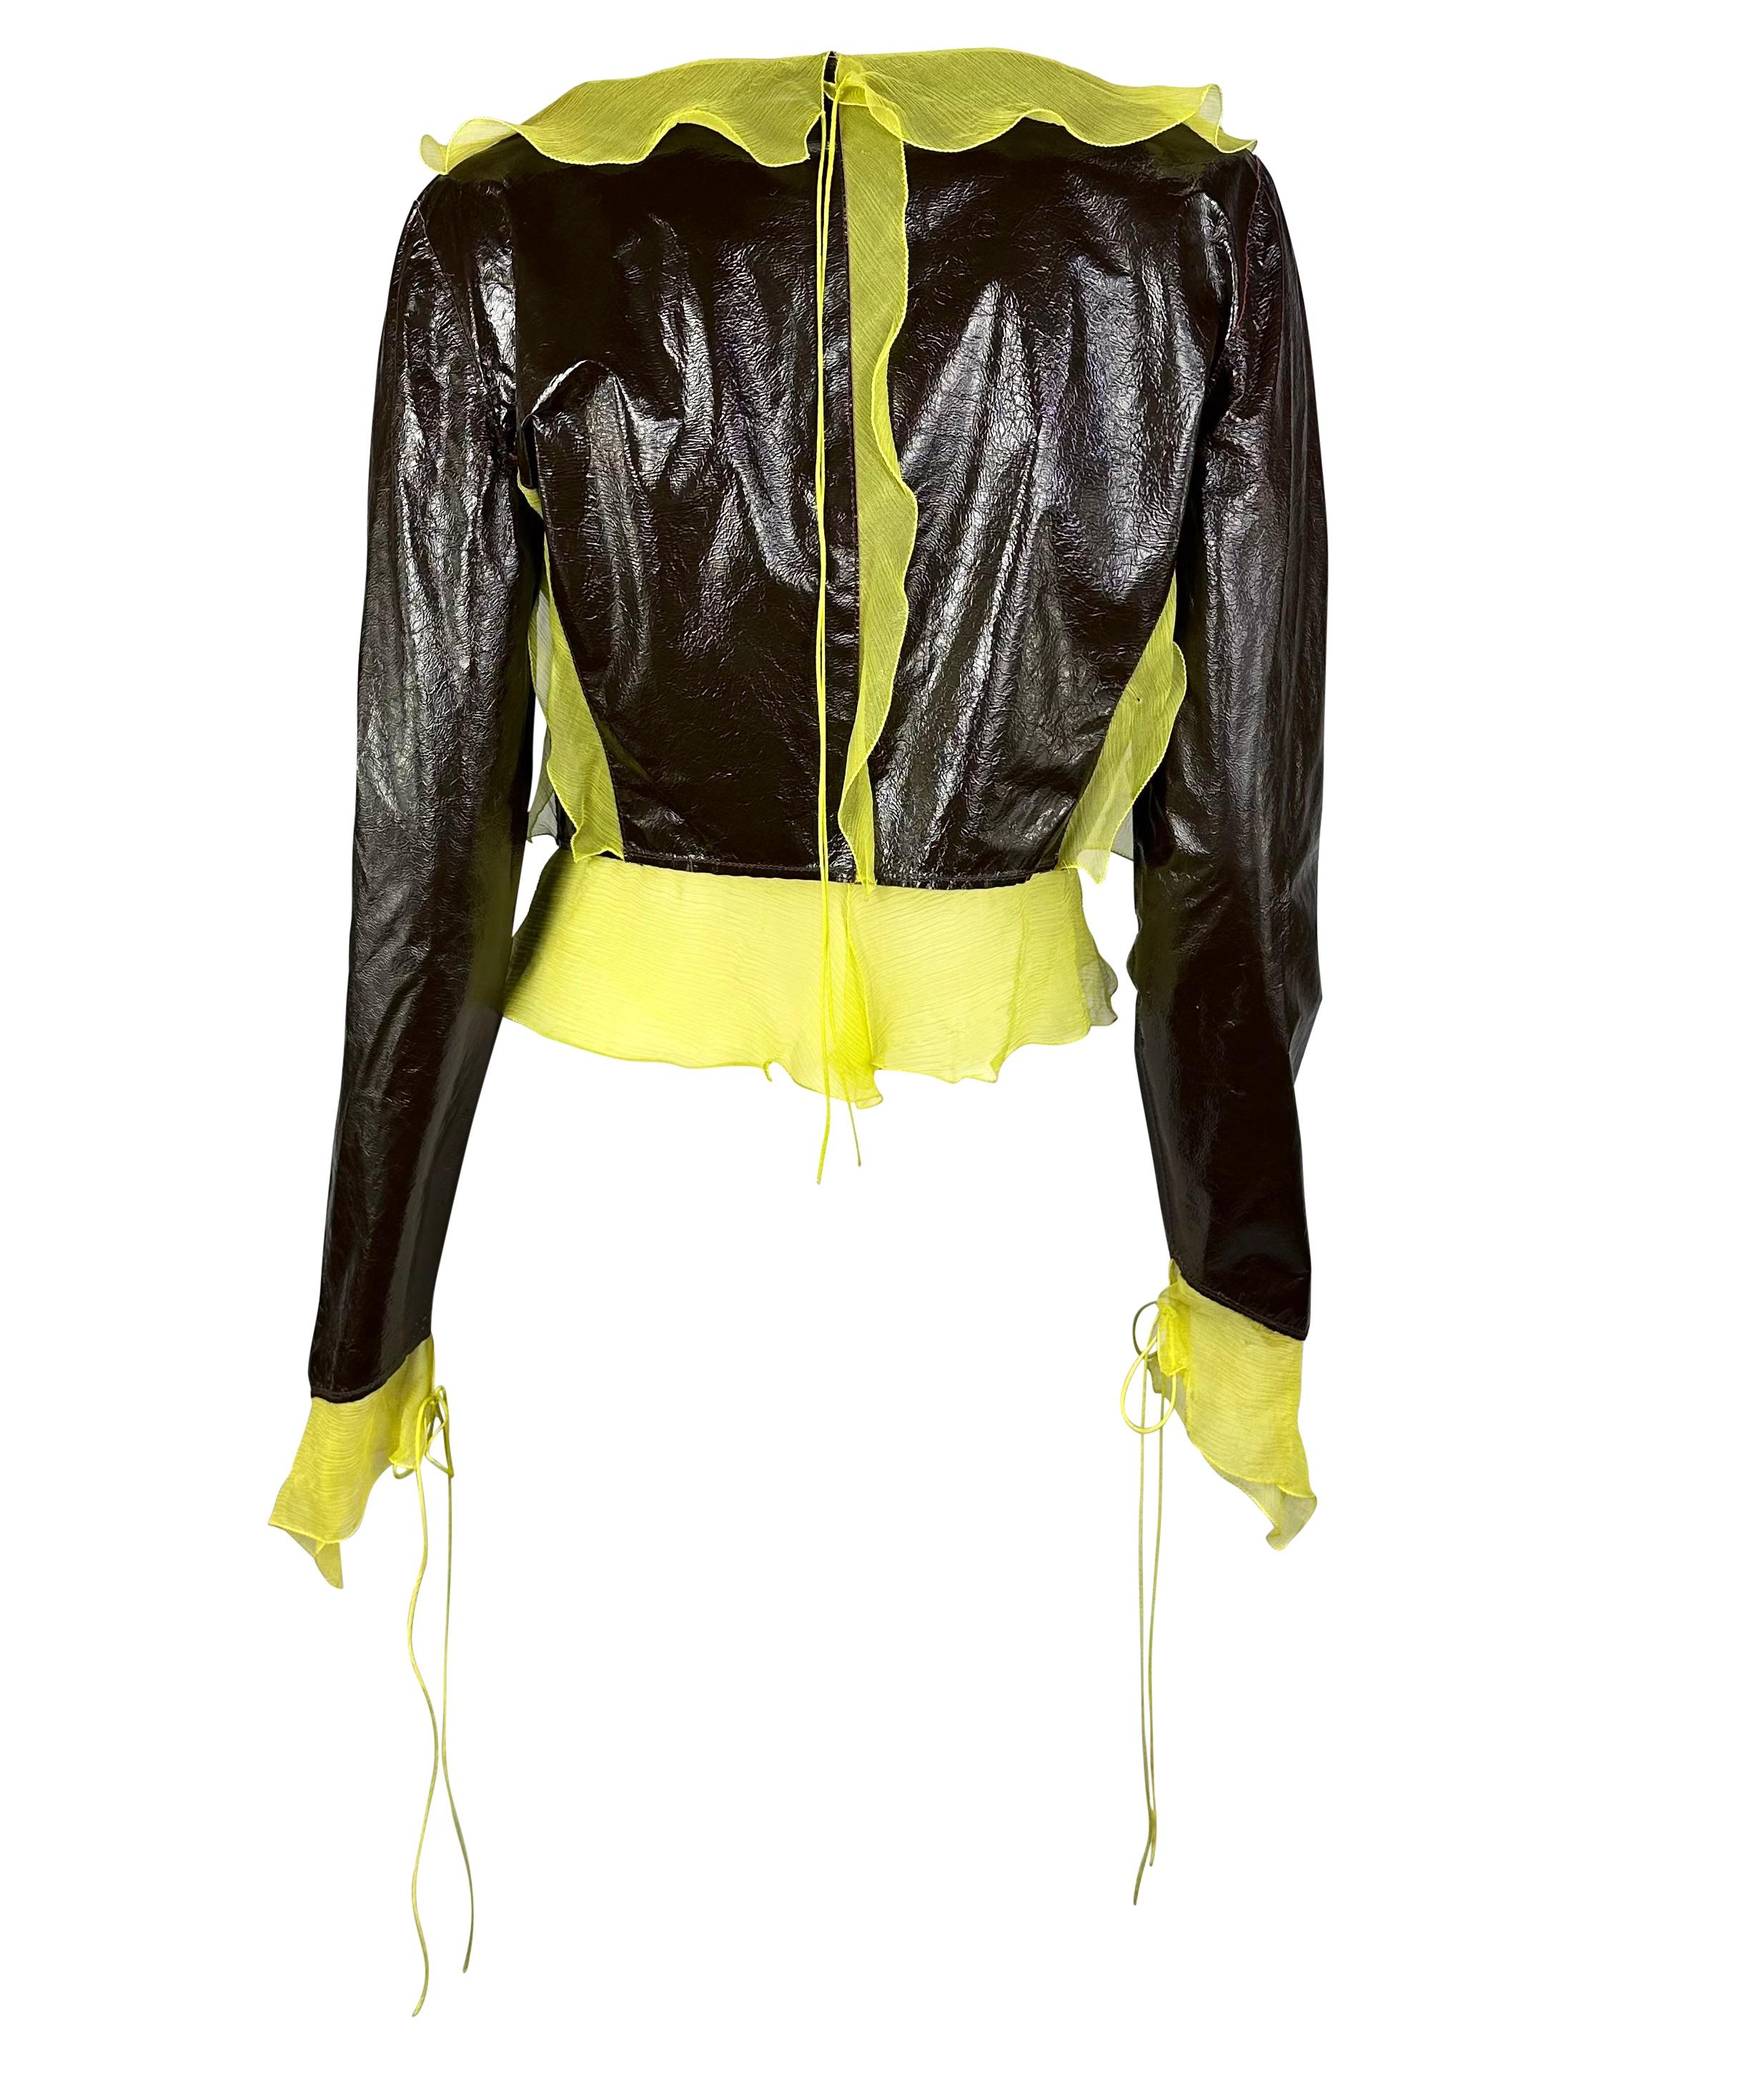 S/S 2000 Fendi by Karl Lagerfeld Ad Patent Leather Lime Silk Chiffon Jacket In Good Condition In West Hollywood, CA